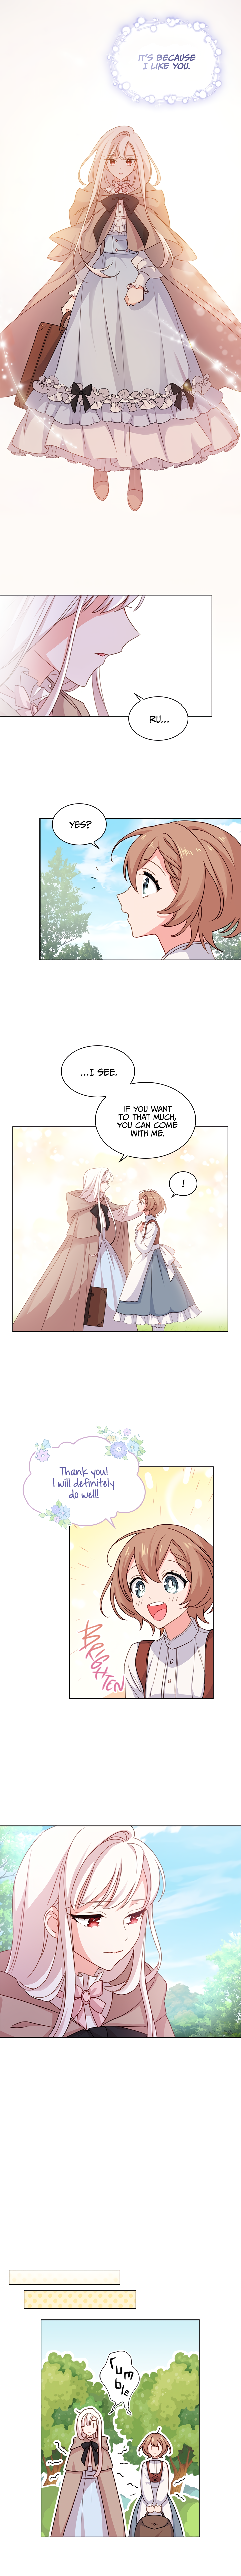 The Lady Wants to Rest Chapter 4 - Page 7